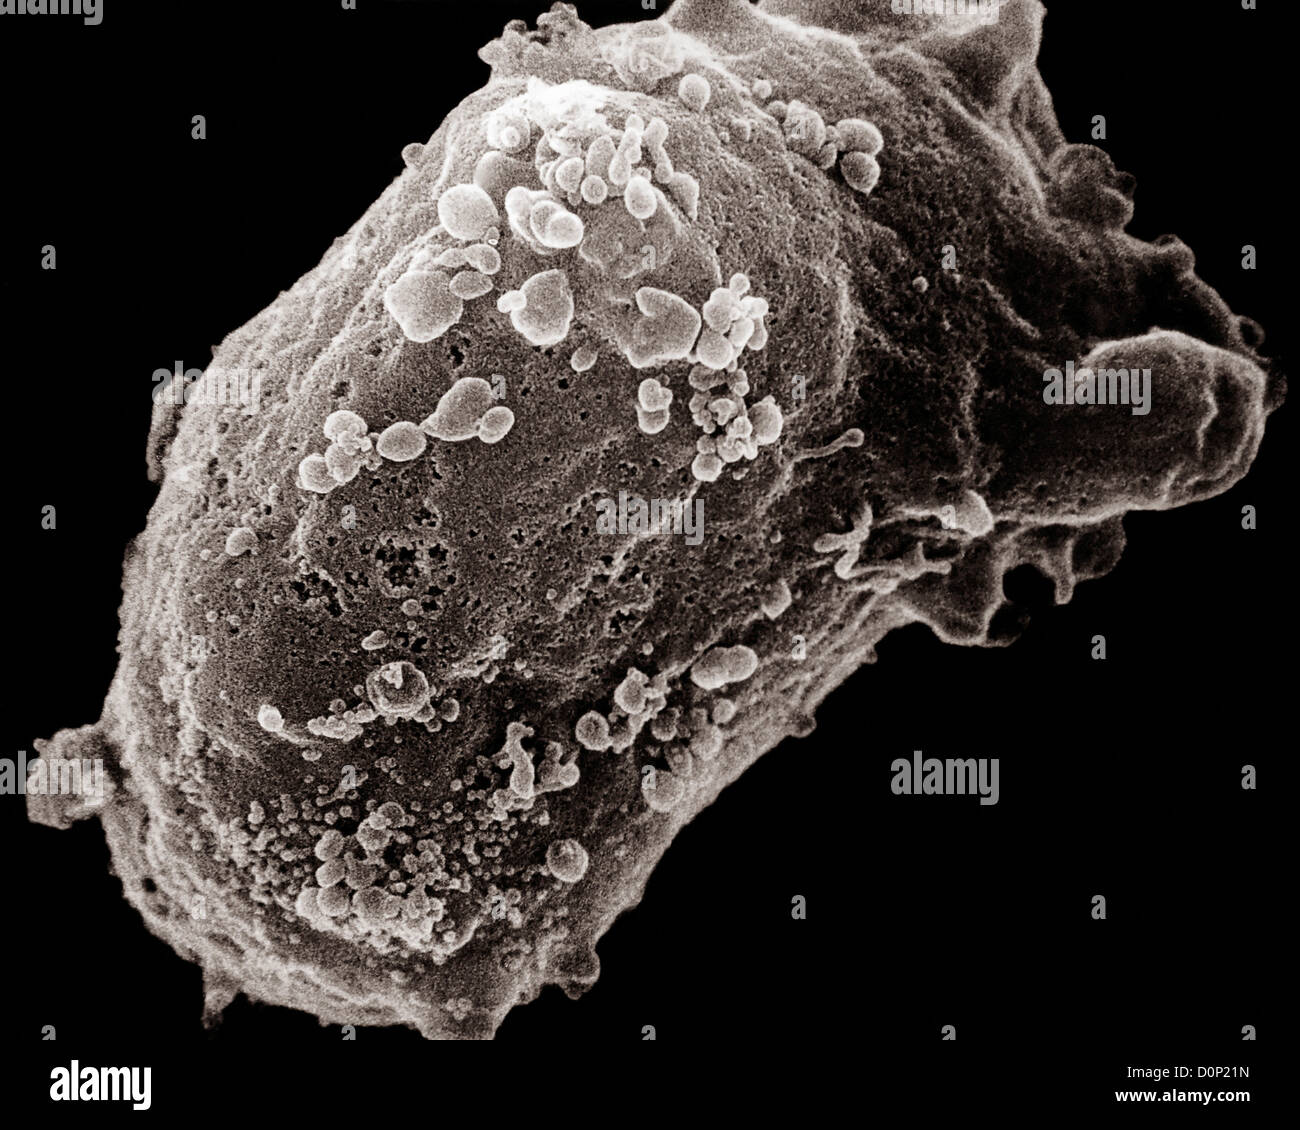 A scanning electron microscope image of a lymphocyte (white blood cell) with an HIV cluster. Stock Photo